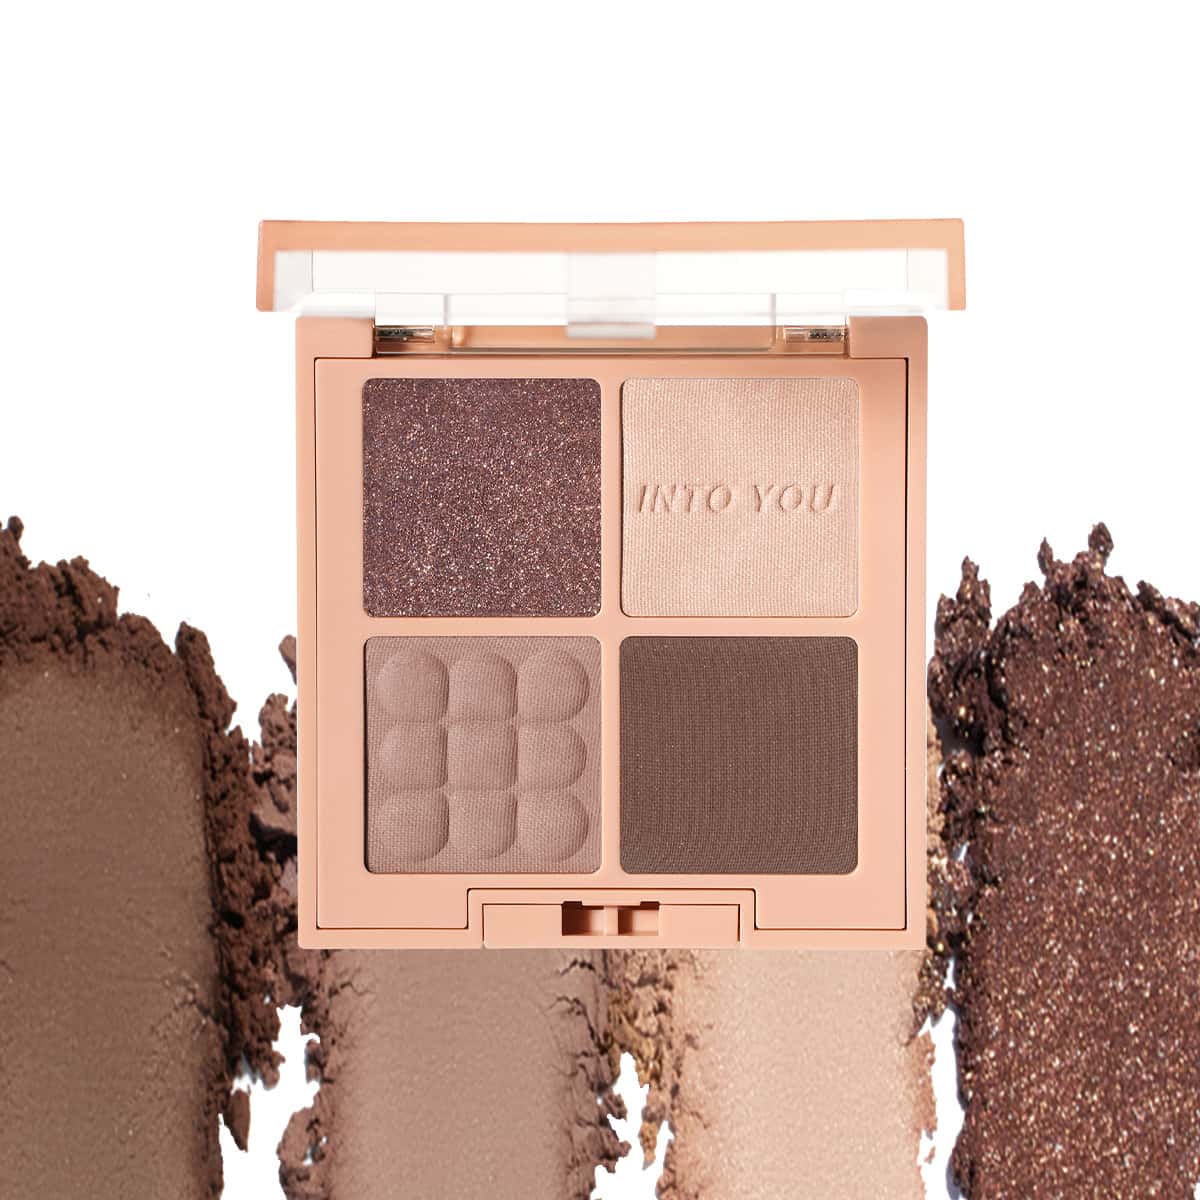 INTO YOU Daily Life Eyeshadow Palette